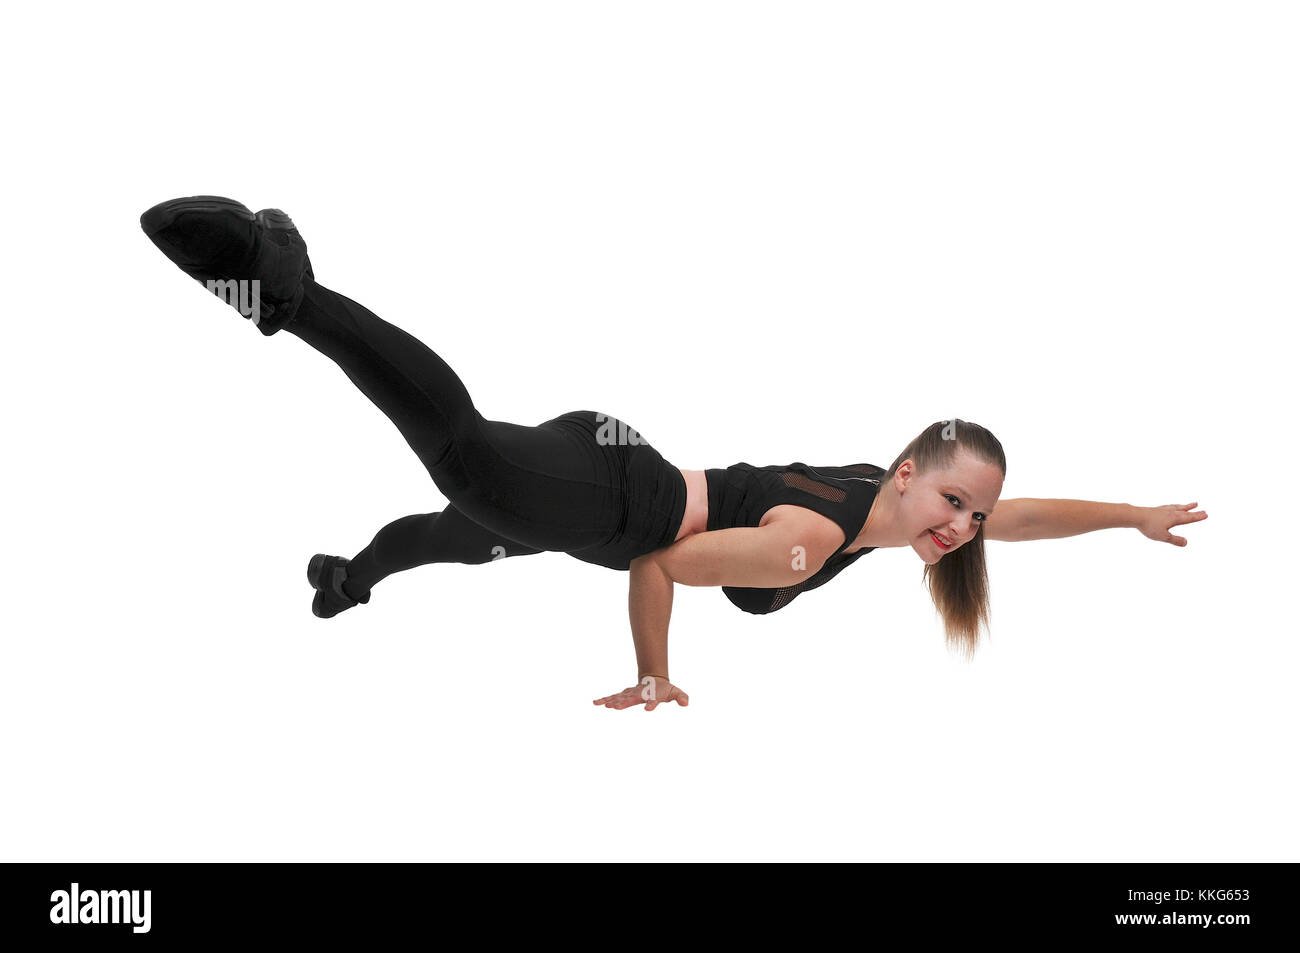 Beautiful woman exercising doing a set of one handed pushups Stock Photo